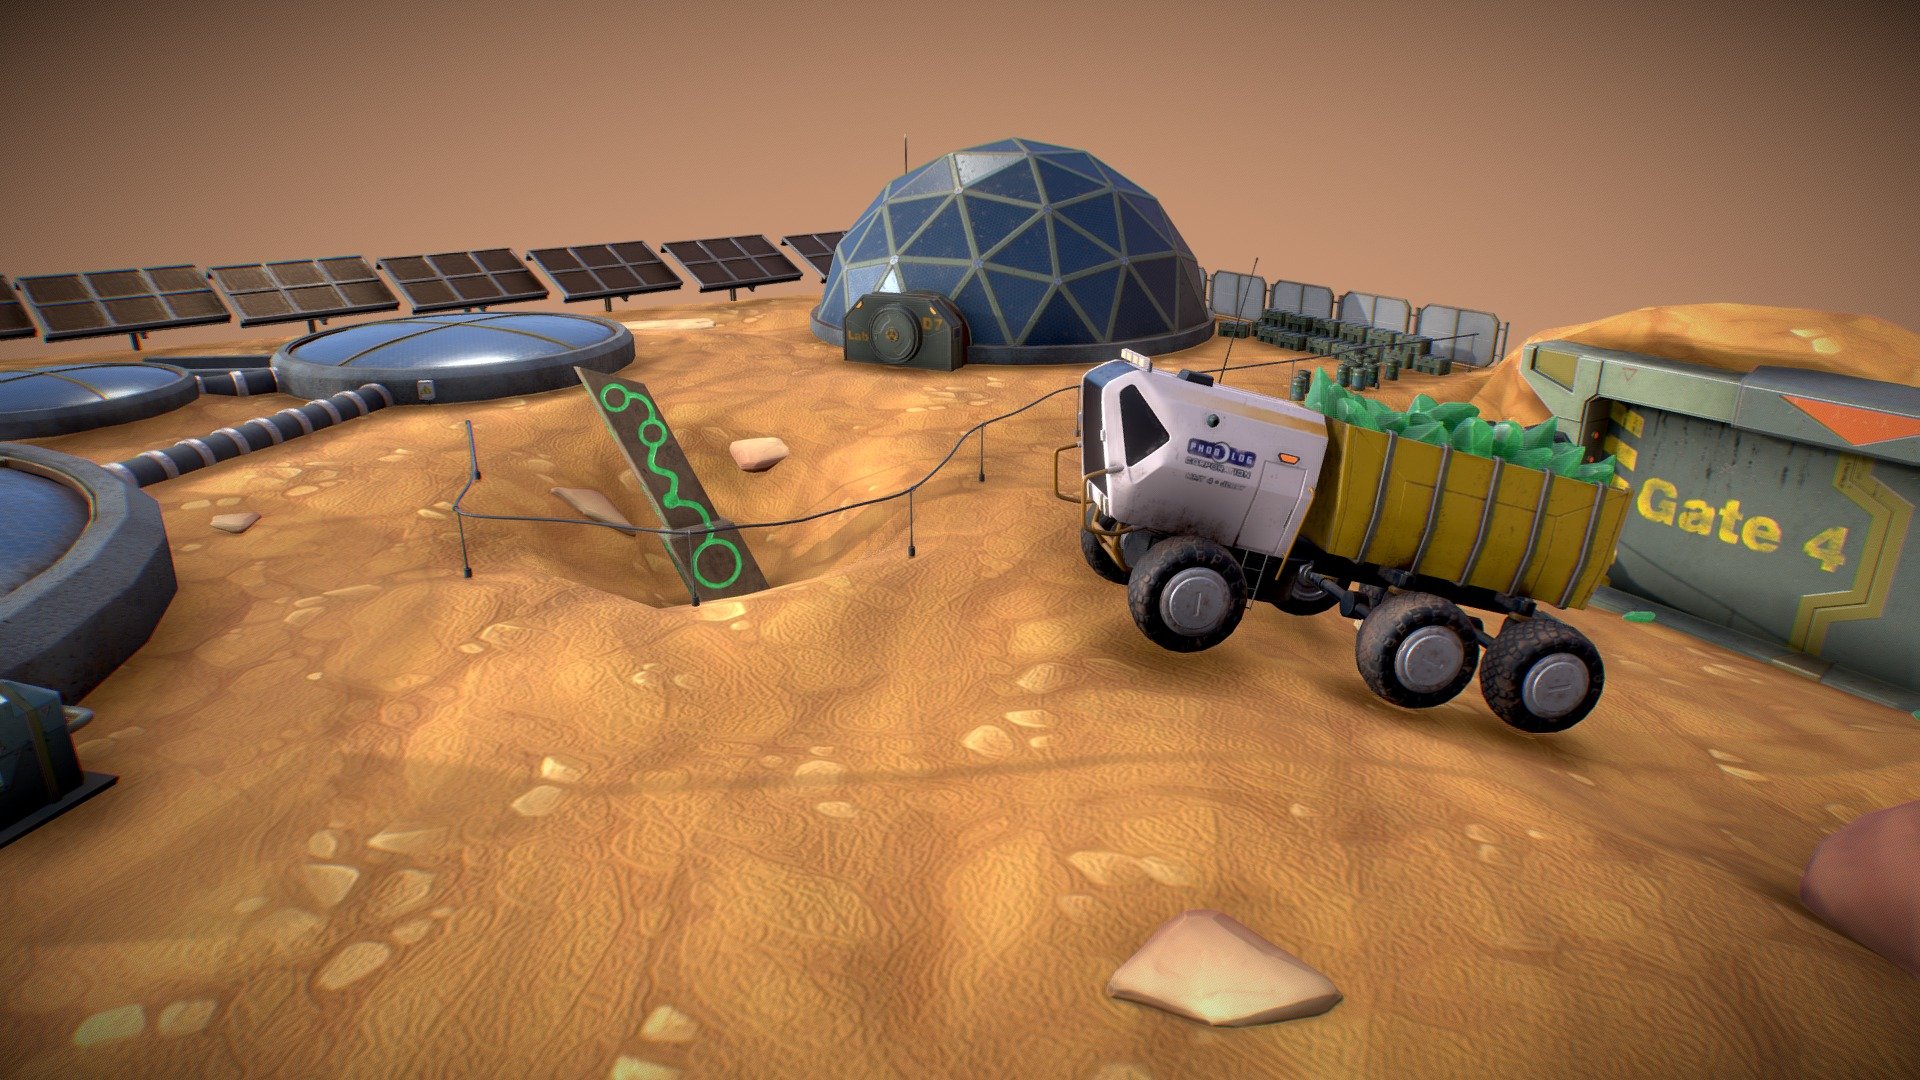 This is my personal studying project called “Martian Colony”. Textured in 3D-Coat, most of the props have 1k textures. 

My colony has some living blocks, the laboratory, gates to the mine with some crystals, and the mining vehicle full of them. And in the center of the scene, I placed the obelisk, which initially attracted the attention of researchers.

Sometimes I want to make some extra-polishing, but it's time to finish and move ahead. It has optimized topology, but many of the props are duplicates, so the total number of triangles could be less. Some of my favorite props are also published separately in my profile.

Check renders of this in Marmoset at my ArtStation

Mining truck

Barrel 

Geodesic dome - Martian Colony (Personal studing project) - 3D model by yakovenko.v.n.0707 3d model